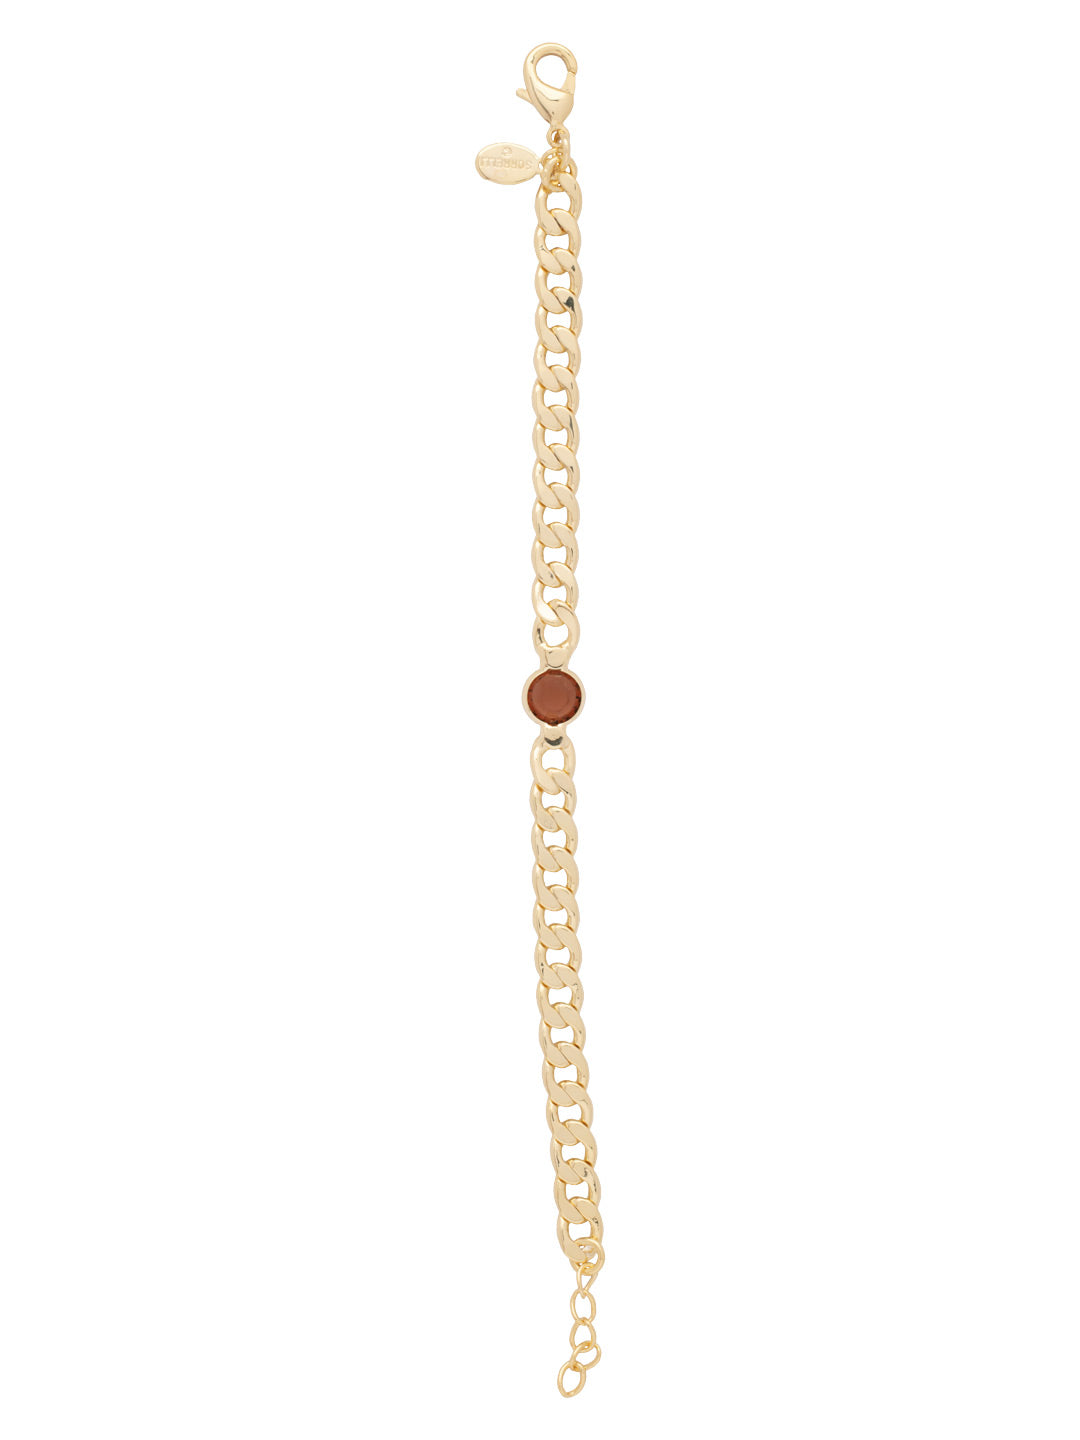 Dewdrop Tennis Bracelet - BFK2BGTOP - <p>The Dewdrop Tennis Bracelet features a single clear cut channel on an adjustable curb chain, secured with a lobster claw clasp. From Sorrelli's Topaz collection in our Bright Gold-tone finish.</p>